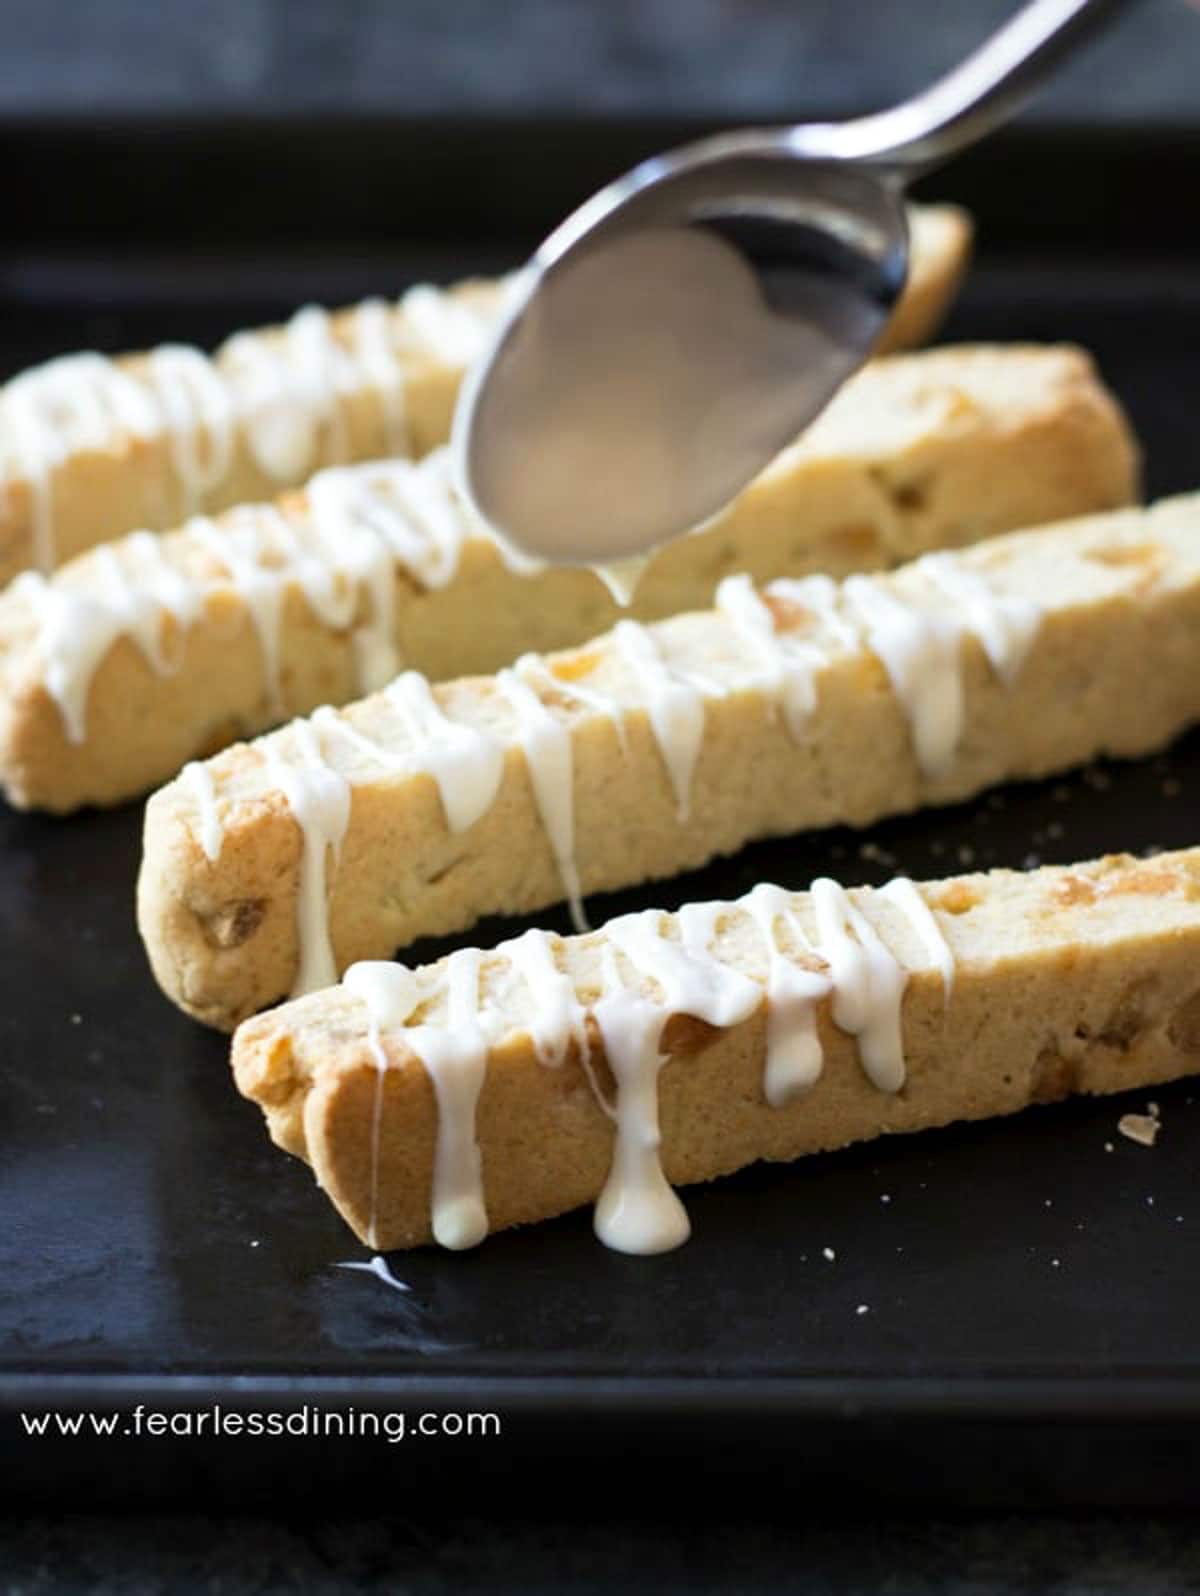 Drizzling melted white chocolate over the biscotti.